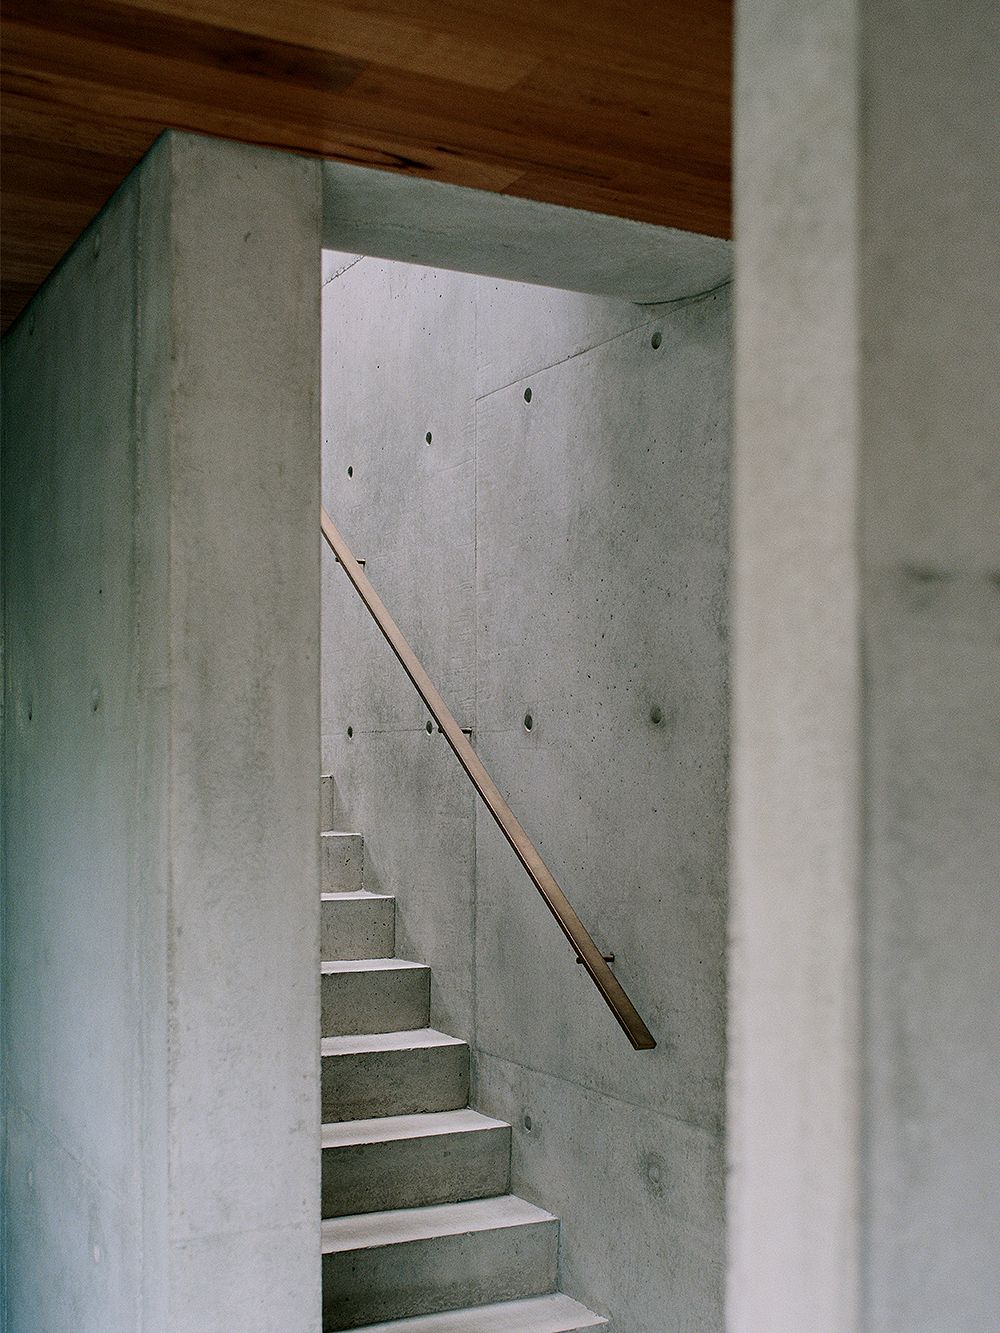 An image of Edition Office's Hawthron House. This image focuses on the concrete staircase.